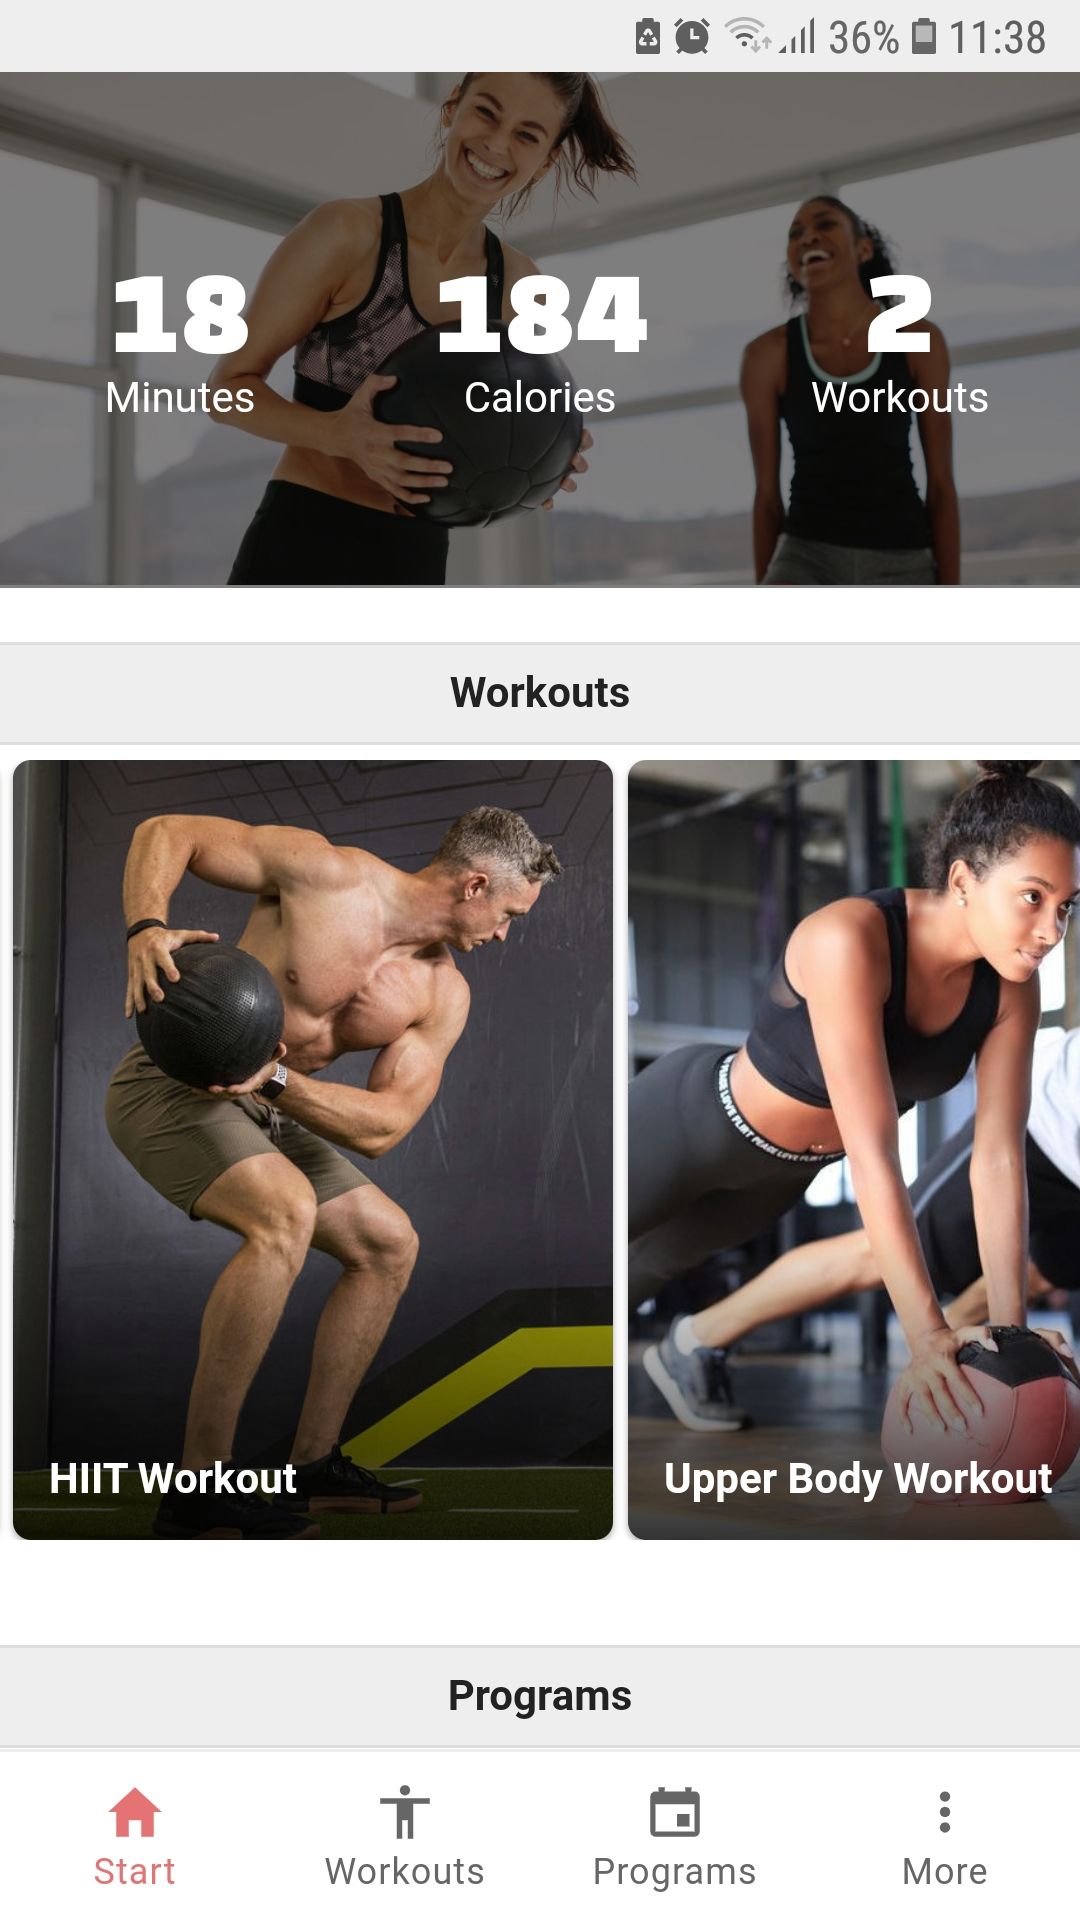 Stay Fit With Samantha Medicine Ball Exercises mobile fitness app workouts